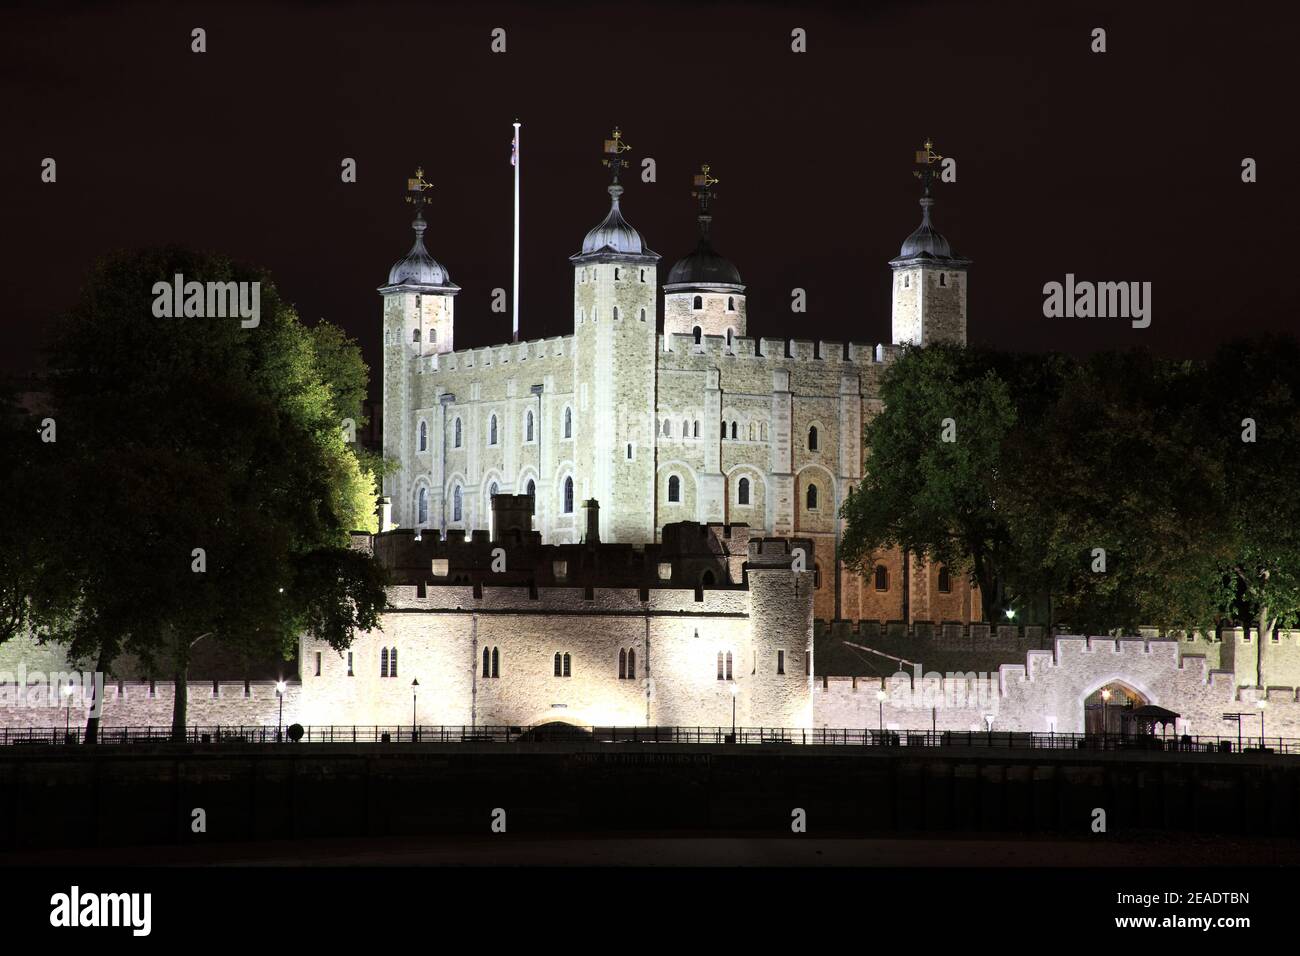 Tower of London at night which is an 11th century Norman castle fortress on the River Thames and is a popular tourist travel destination attraction la Stock Photo